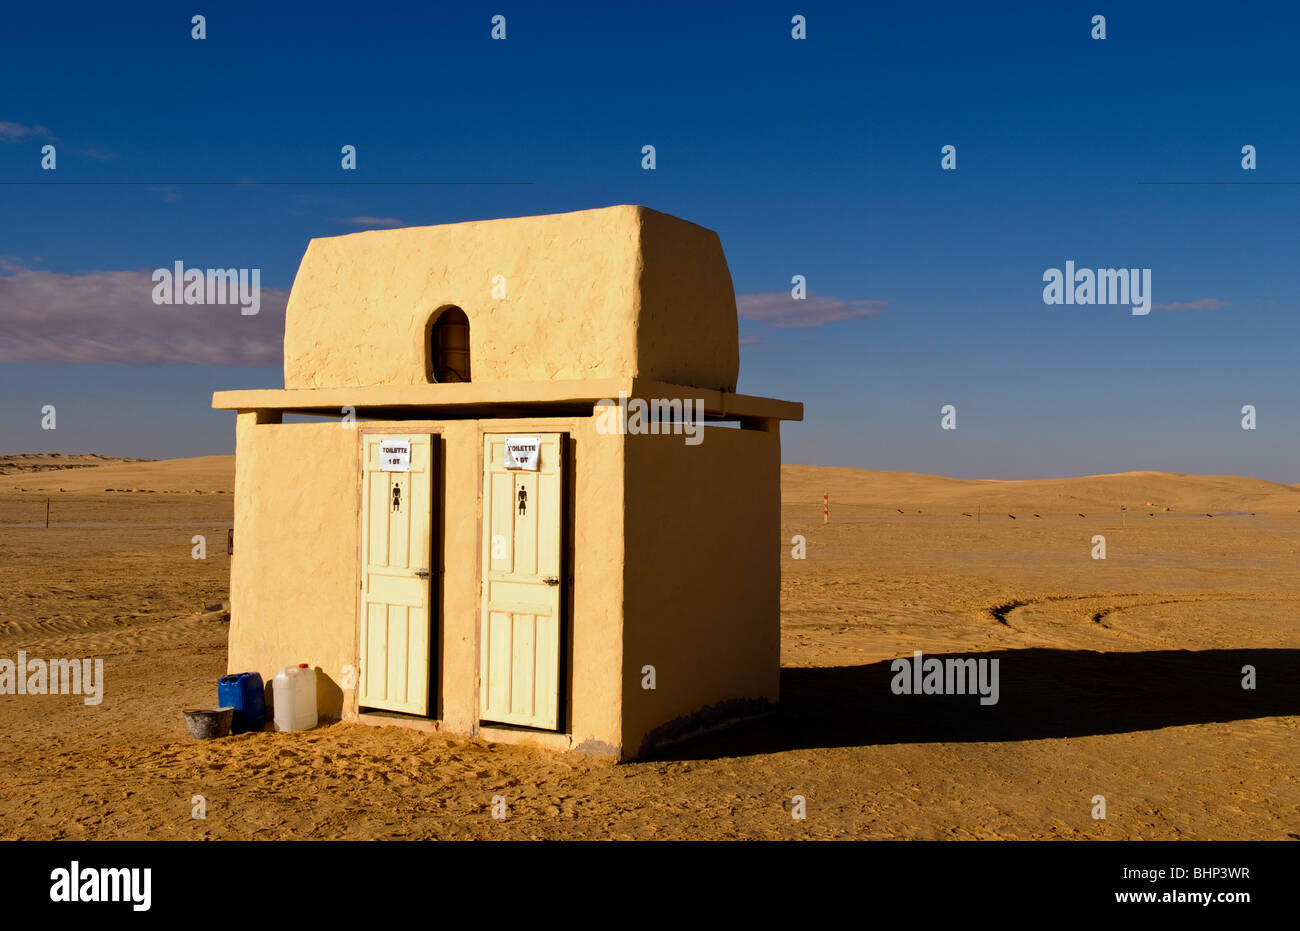 Toilets in the middle of nowhere at famous movie set of Star Wars movies in Sahara Desert near Tozeur Tunisia with his and hers Stock Photo